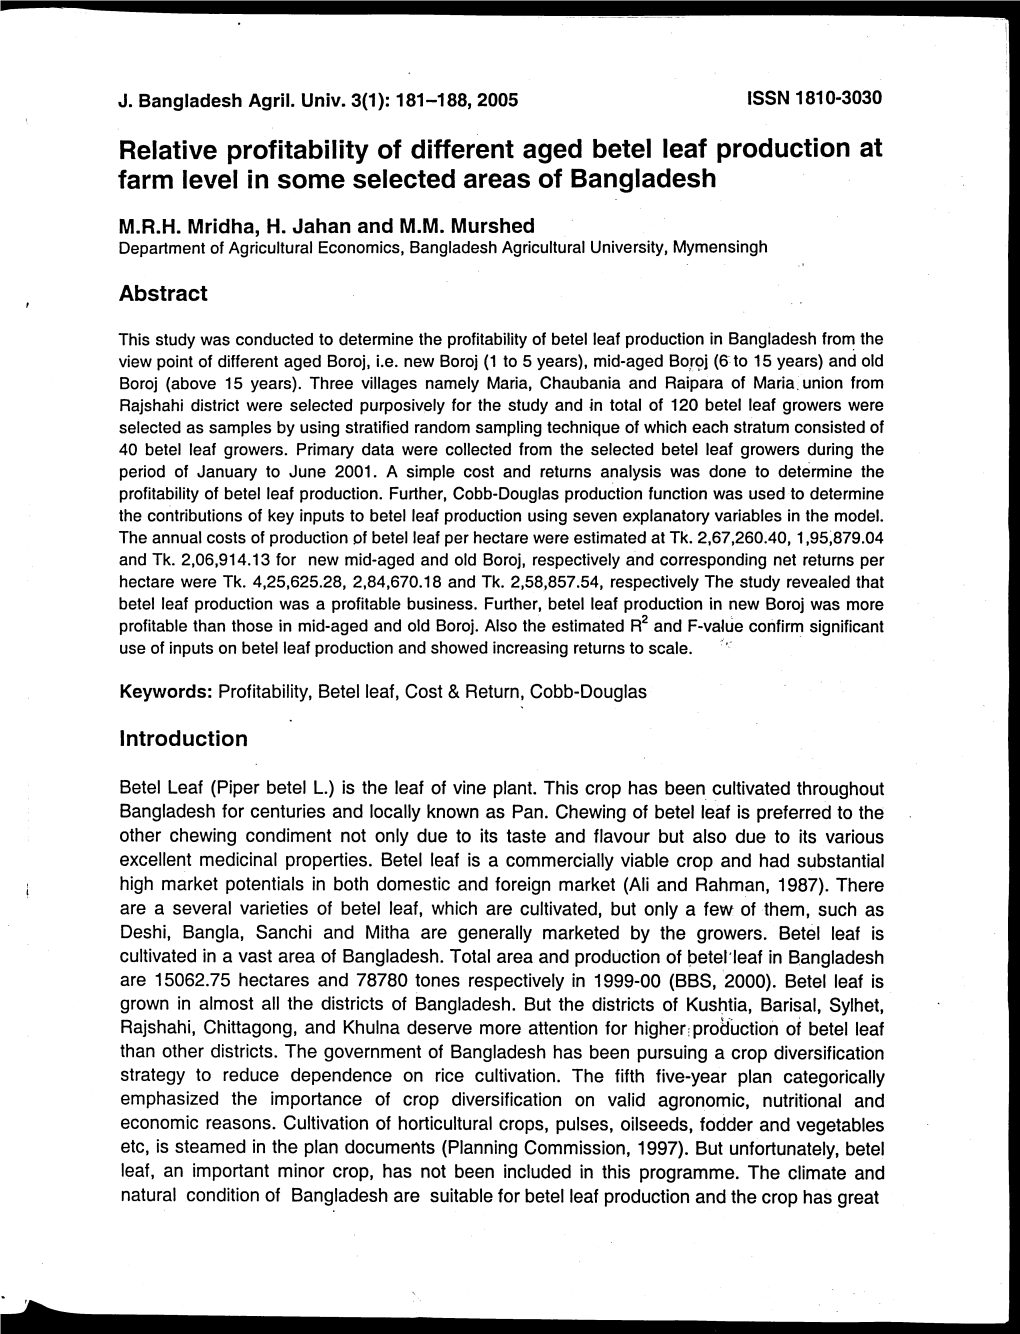 Relative Profitability of Different Aged Betel Leaf Production at Farm Level in Some Selected Areas of Bangladesh